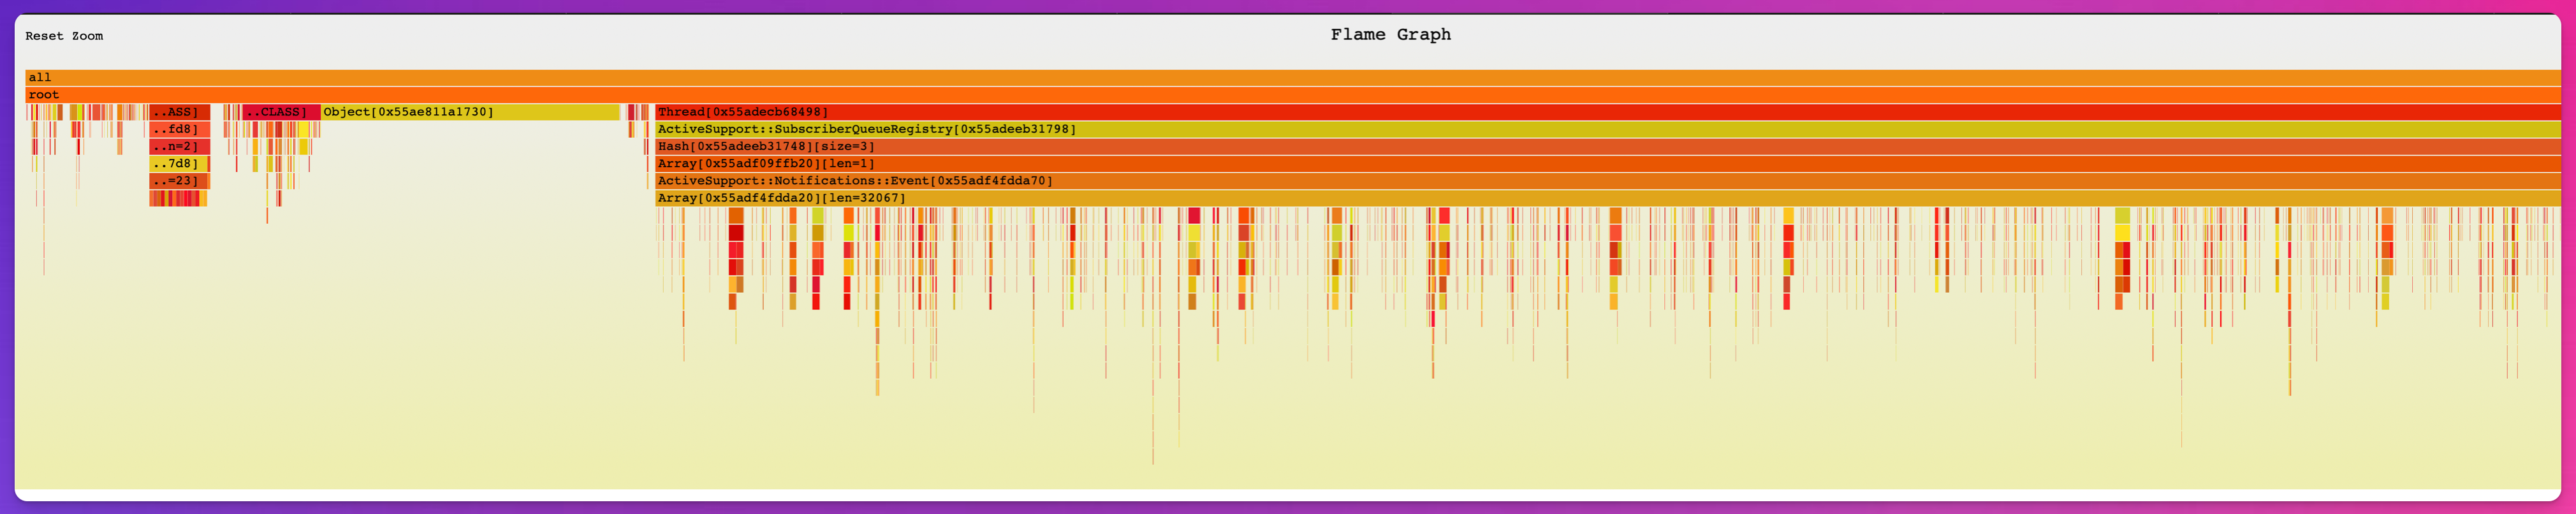 Flame graph showing a Thread holding 1.9GiB of memory.